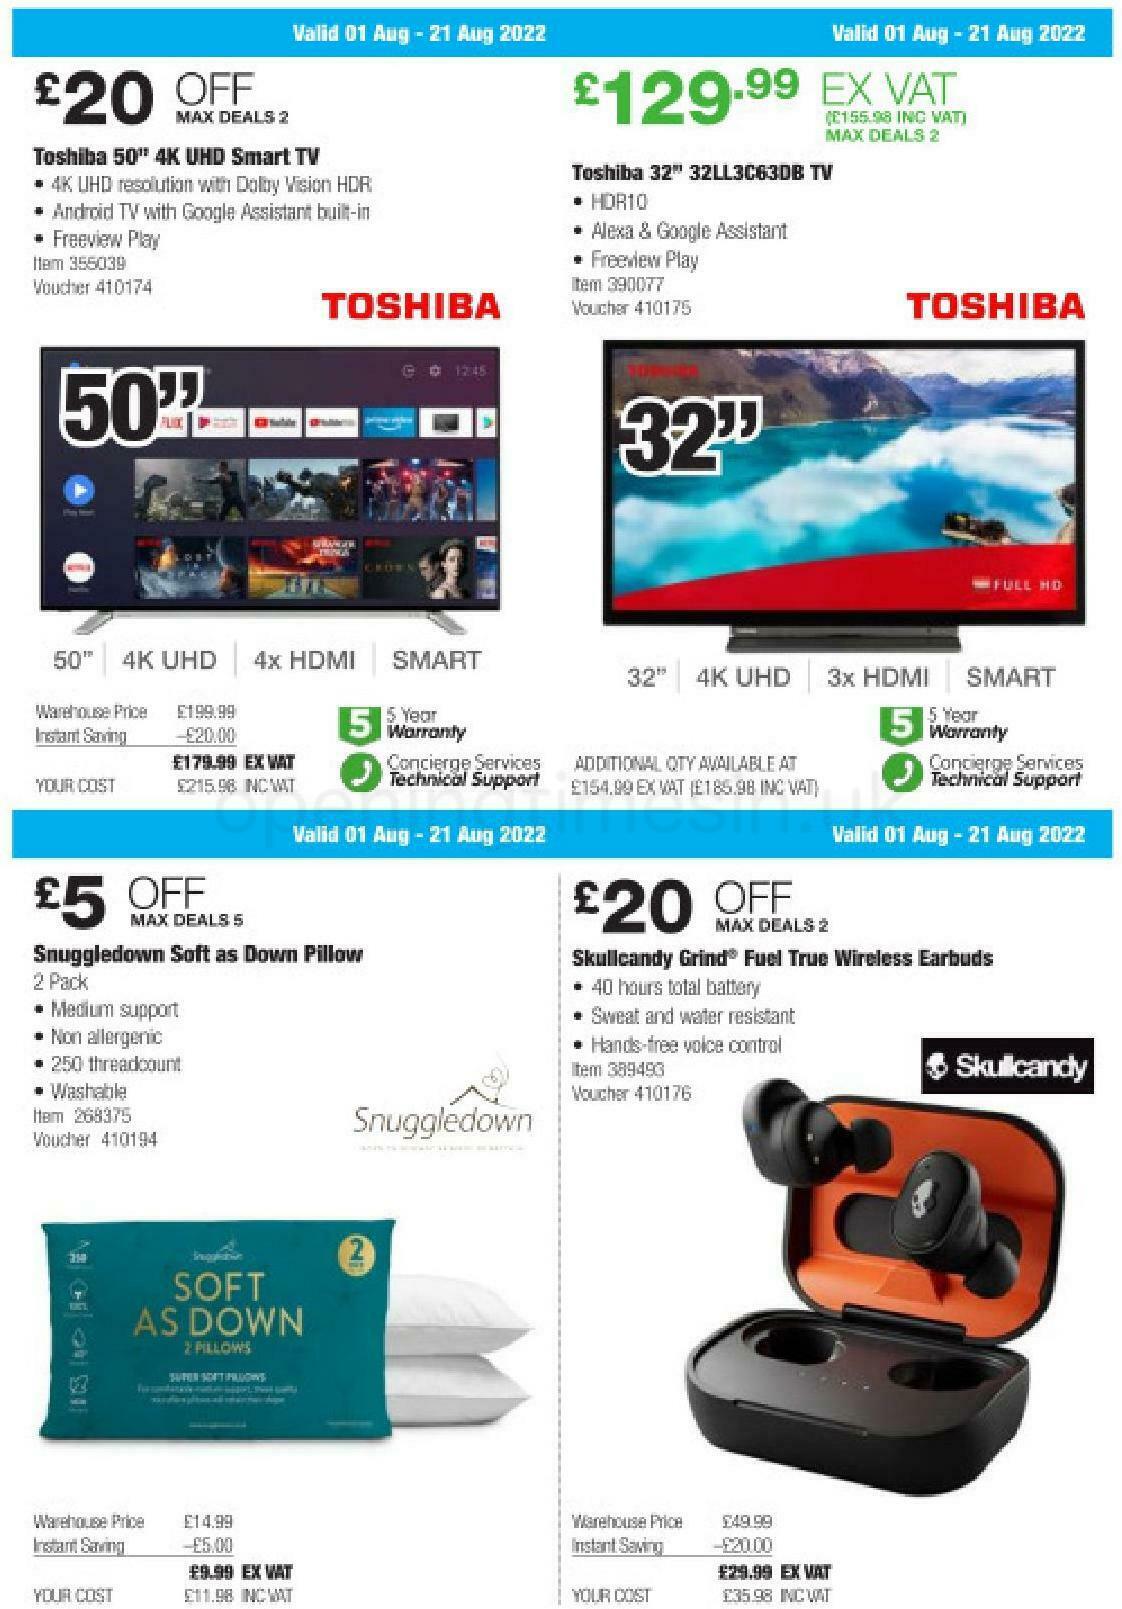 Costco Scotland & Wales Offers from 1 August